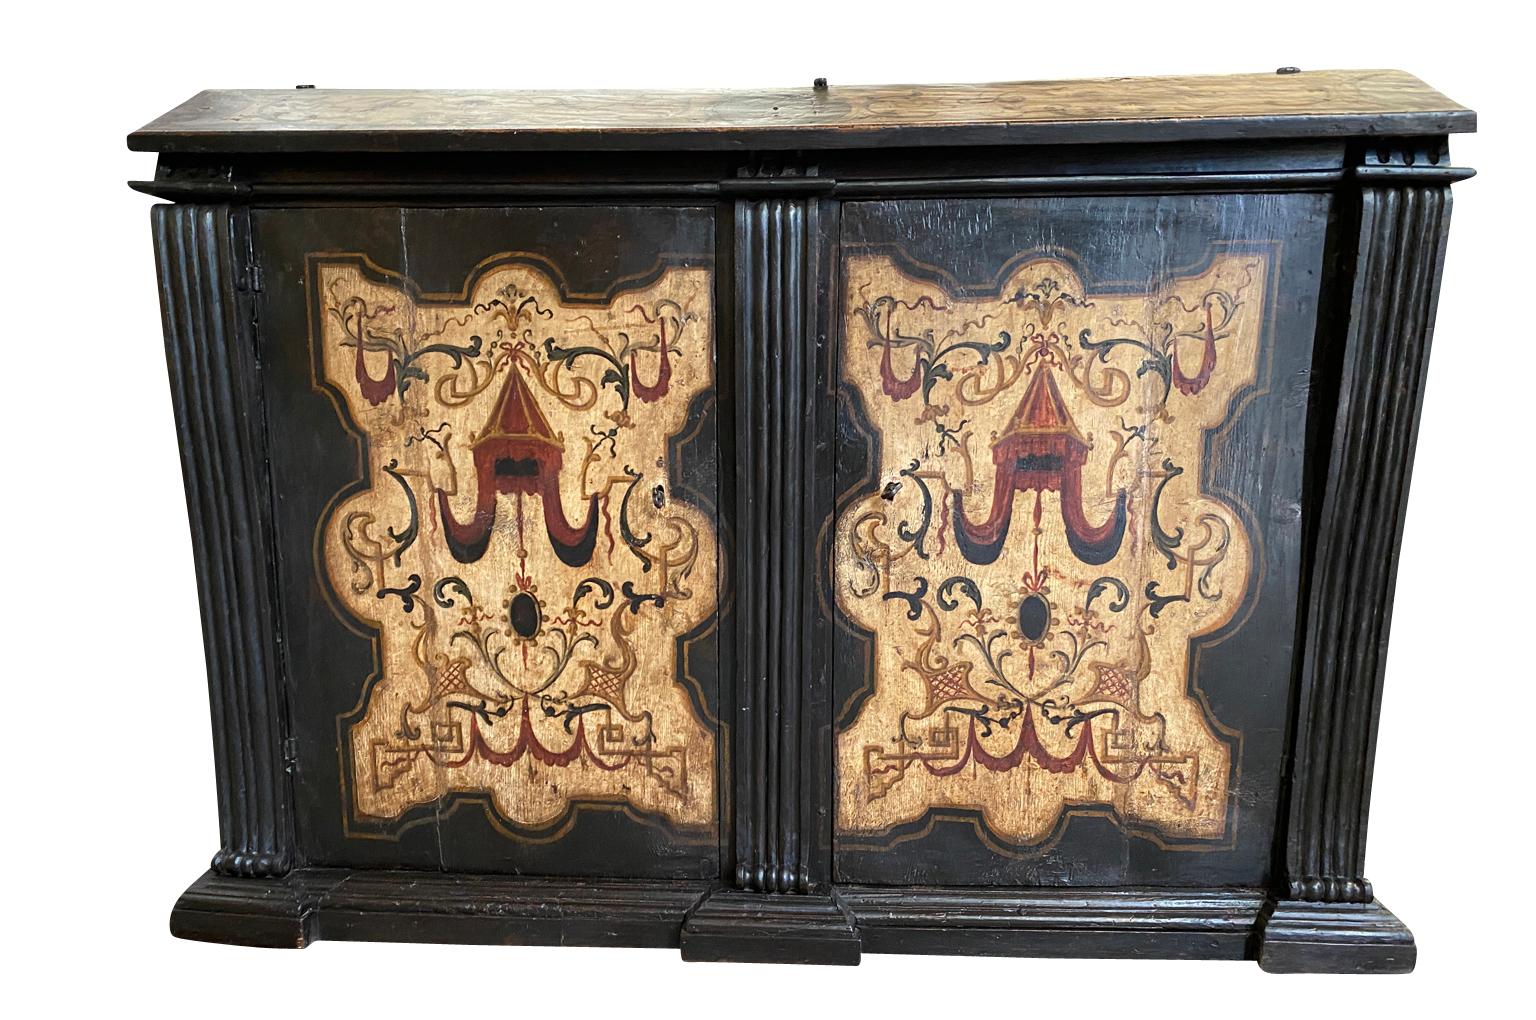 Polychromed Outstanding 17th Century Italian Credenza For Sale